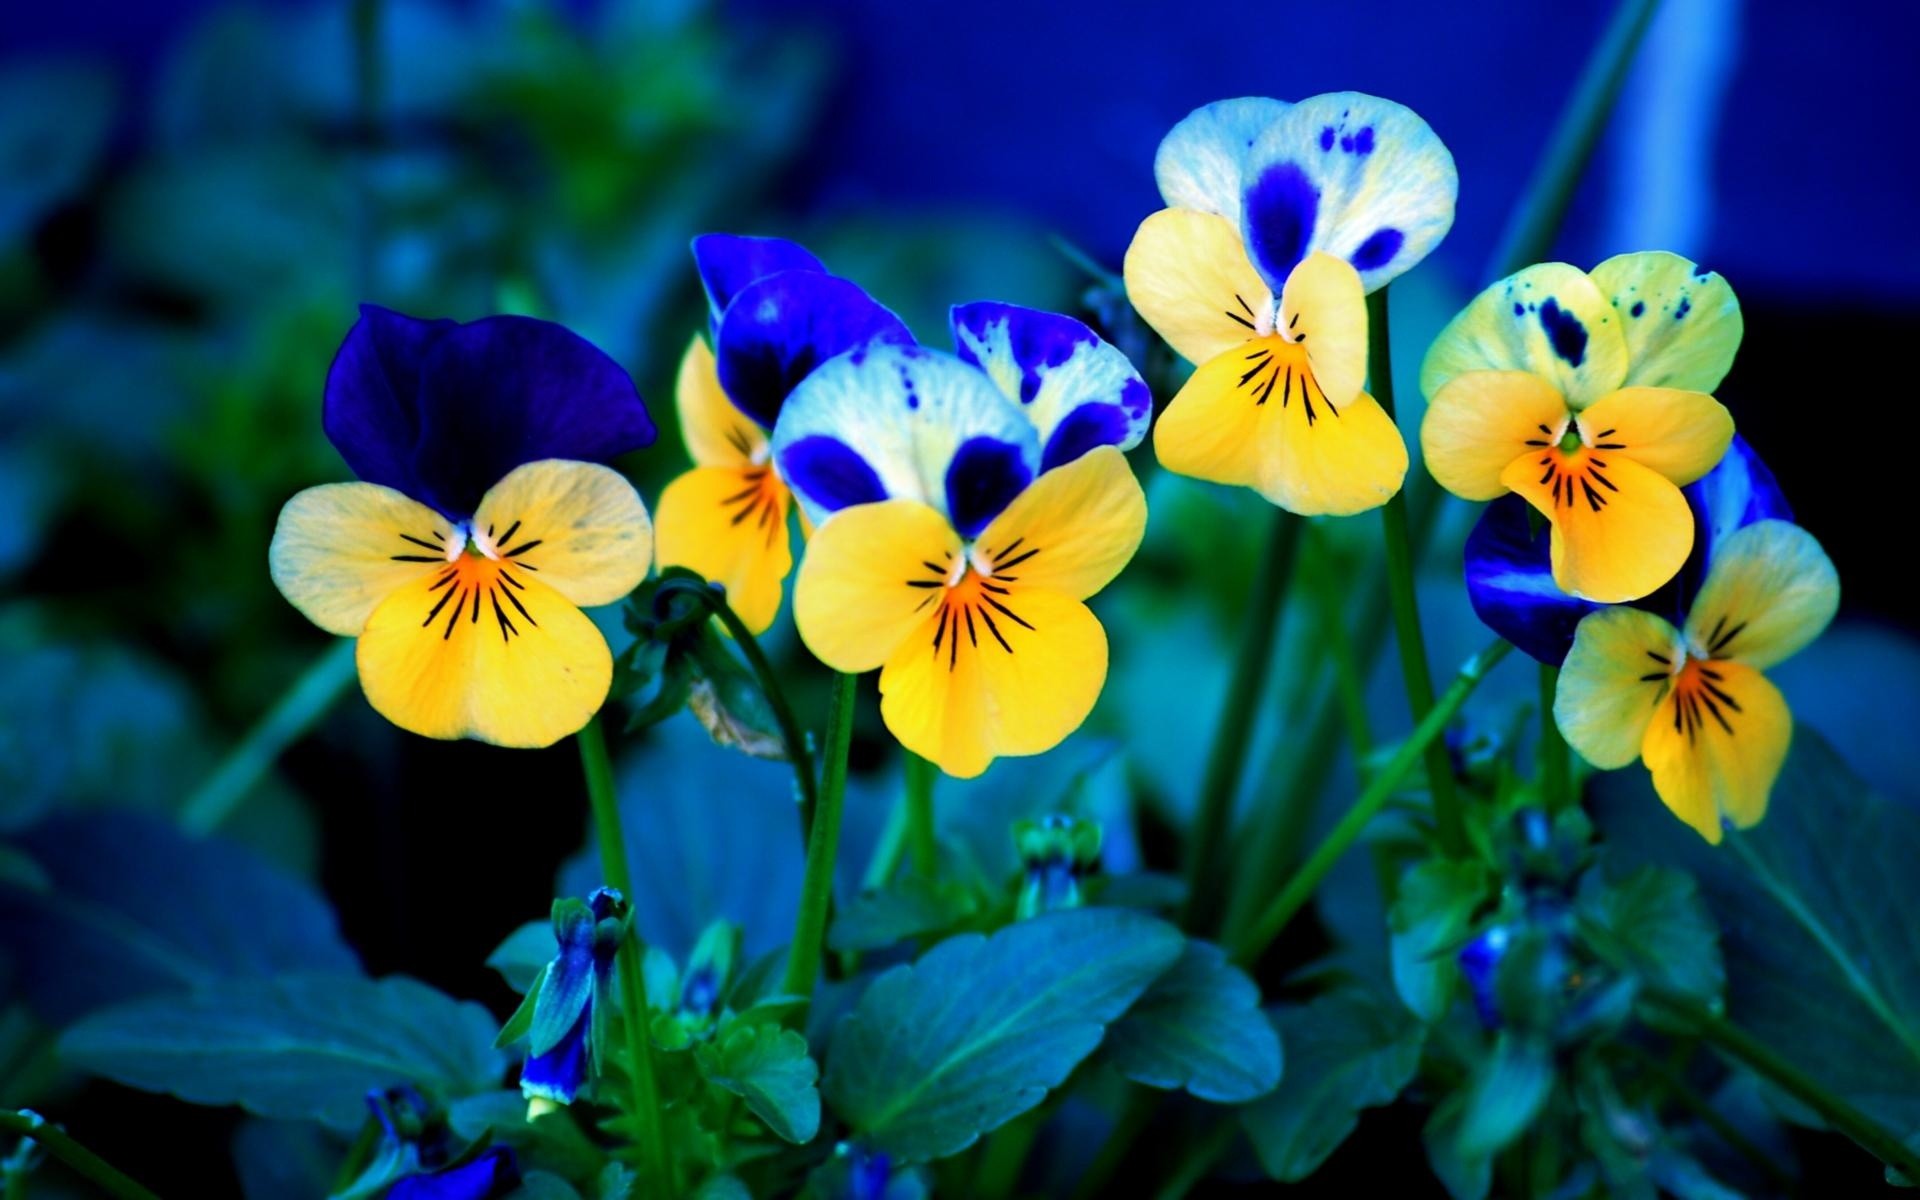 Spring Flowers wallpapers Spring Flowers stock photos